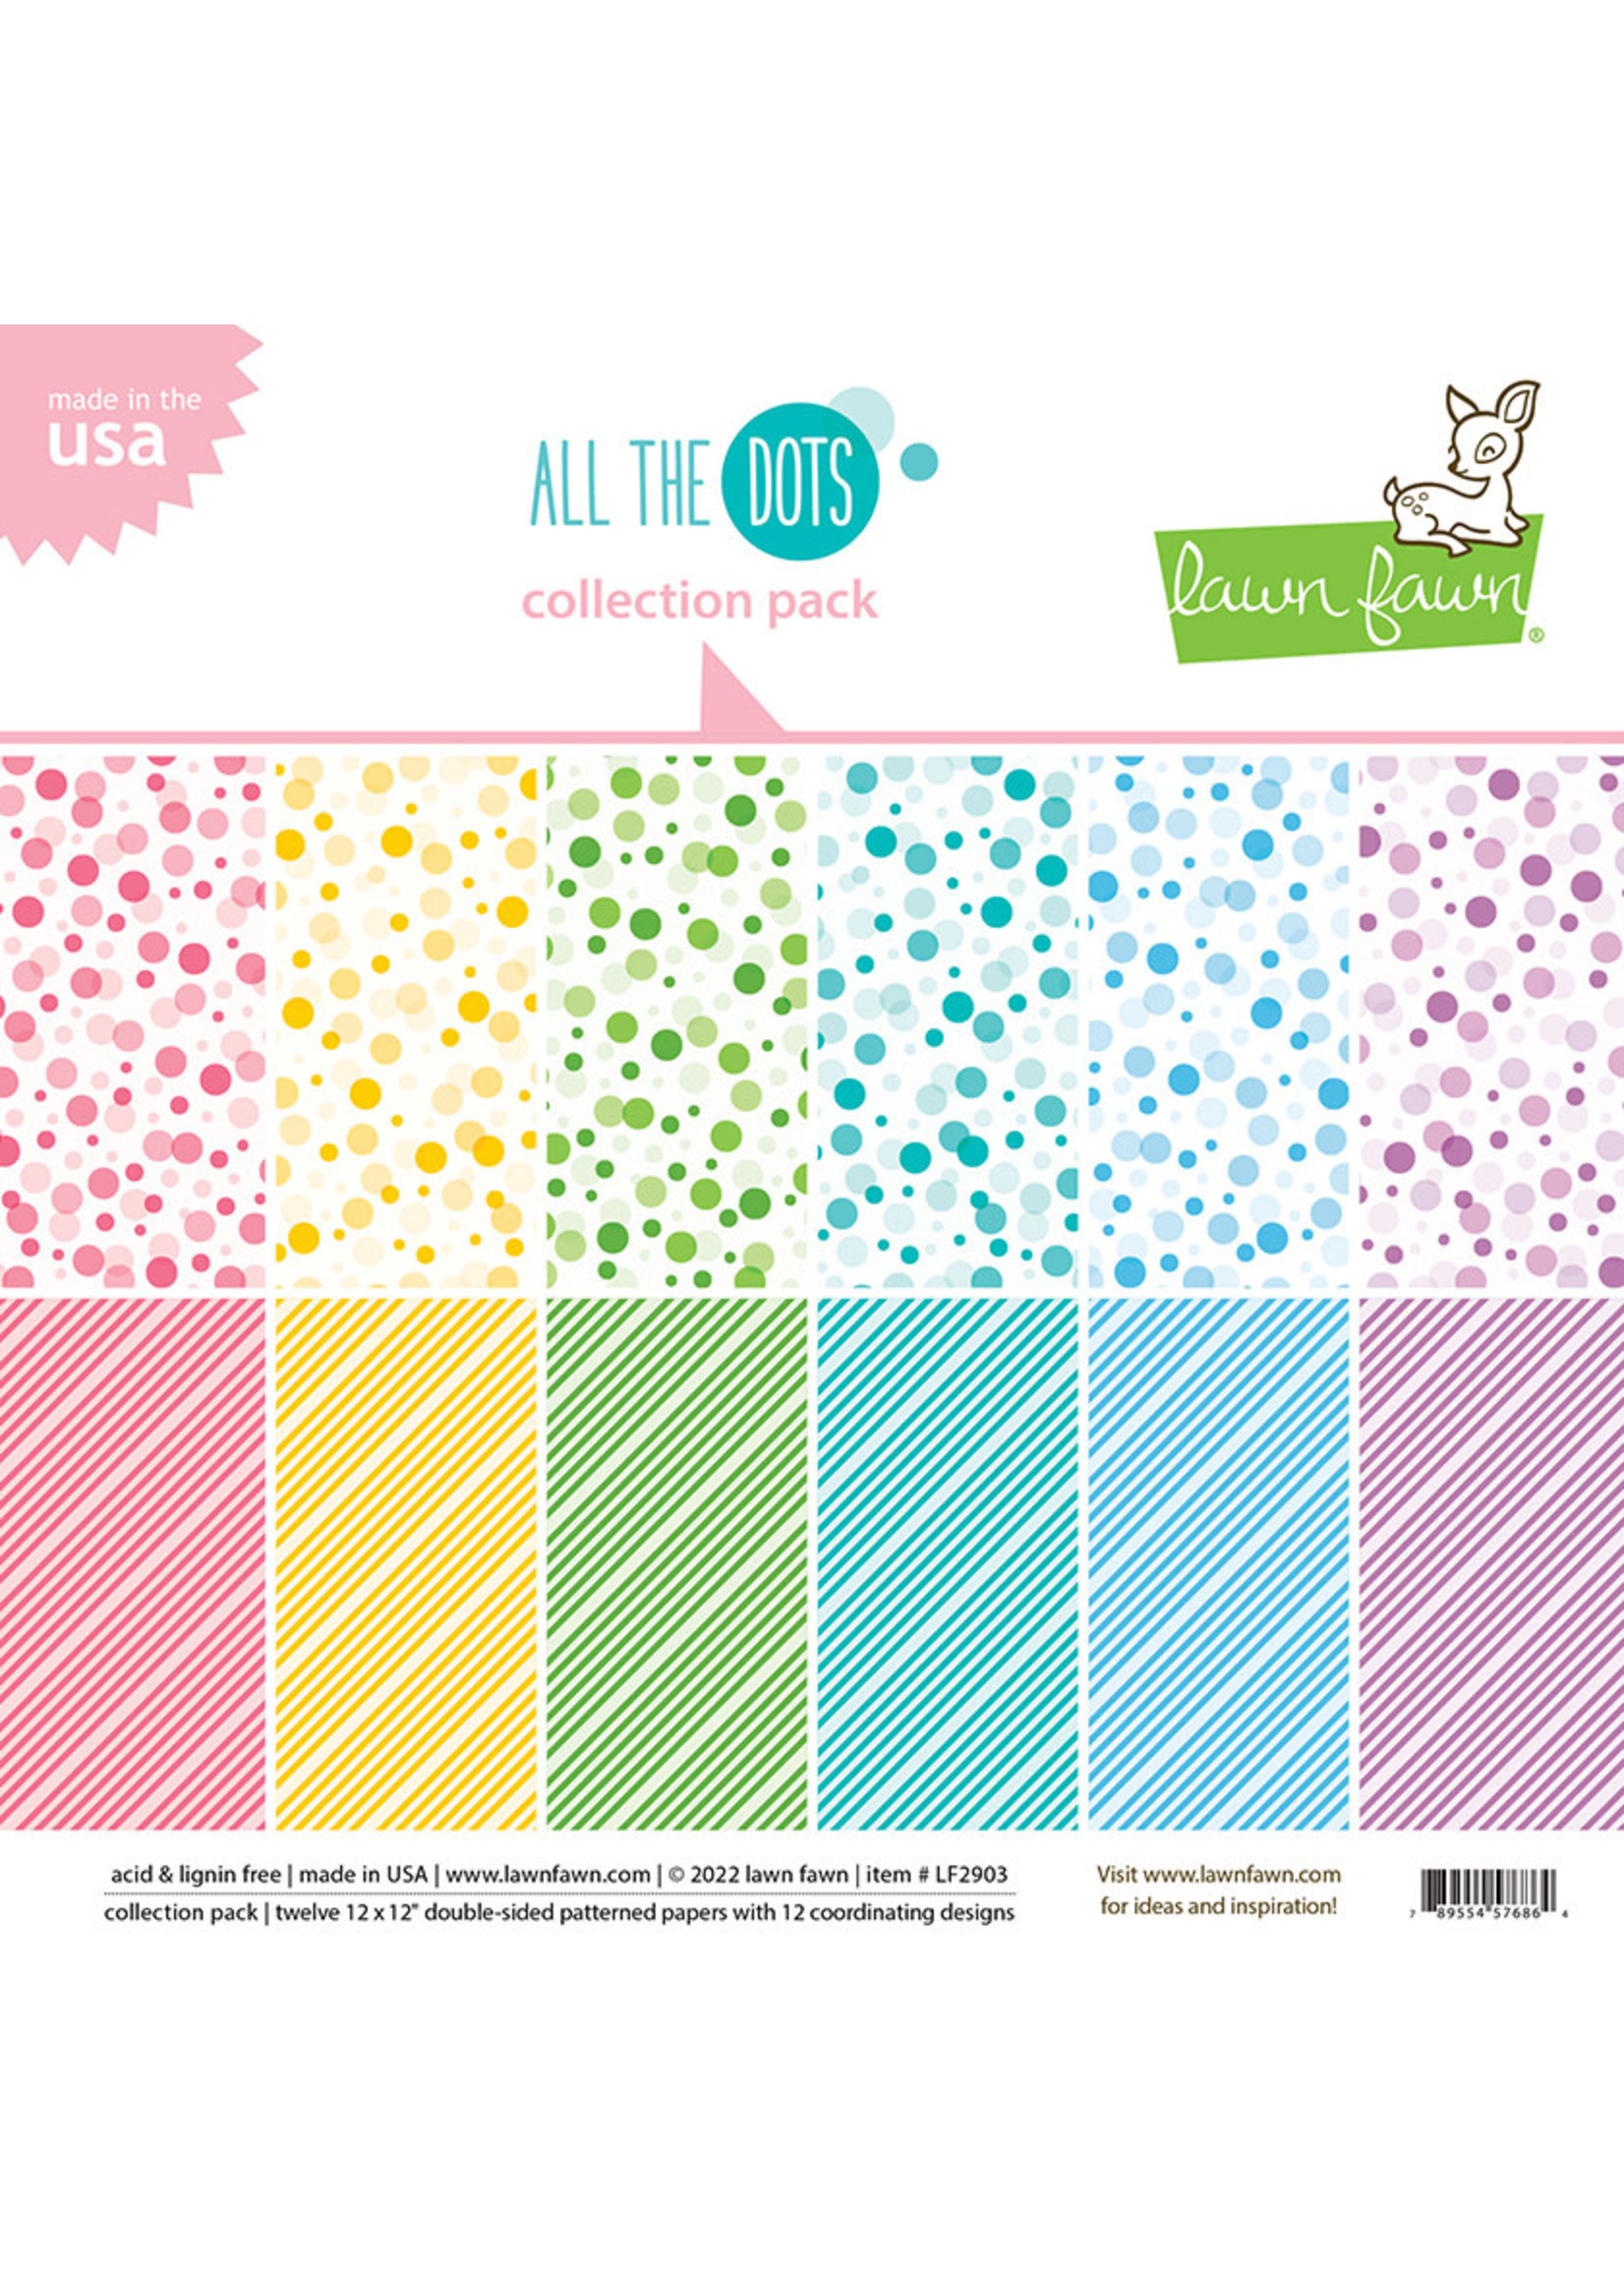 Lawn Fawn all the dots 12x12 collection pack